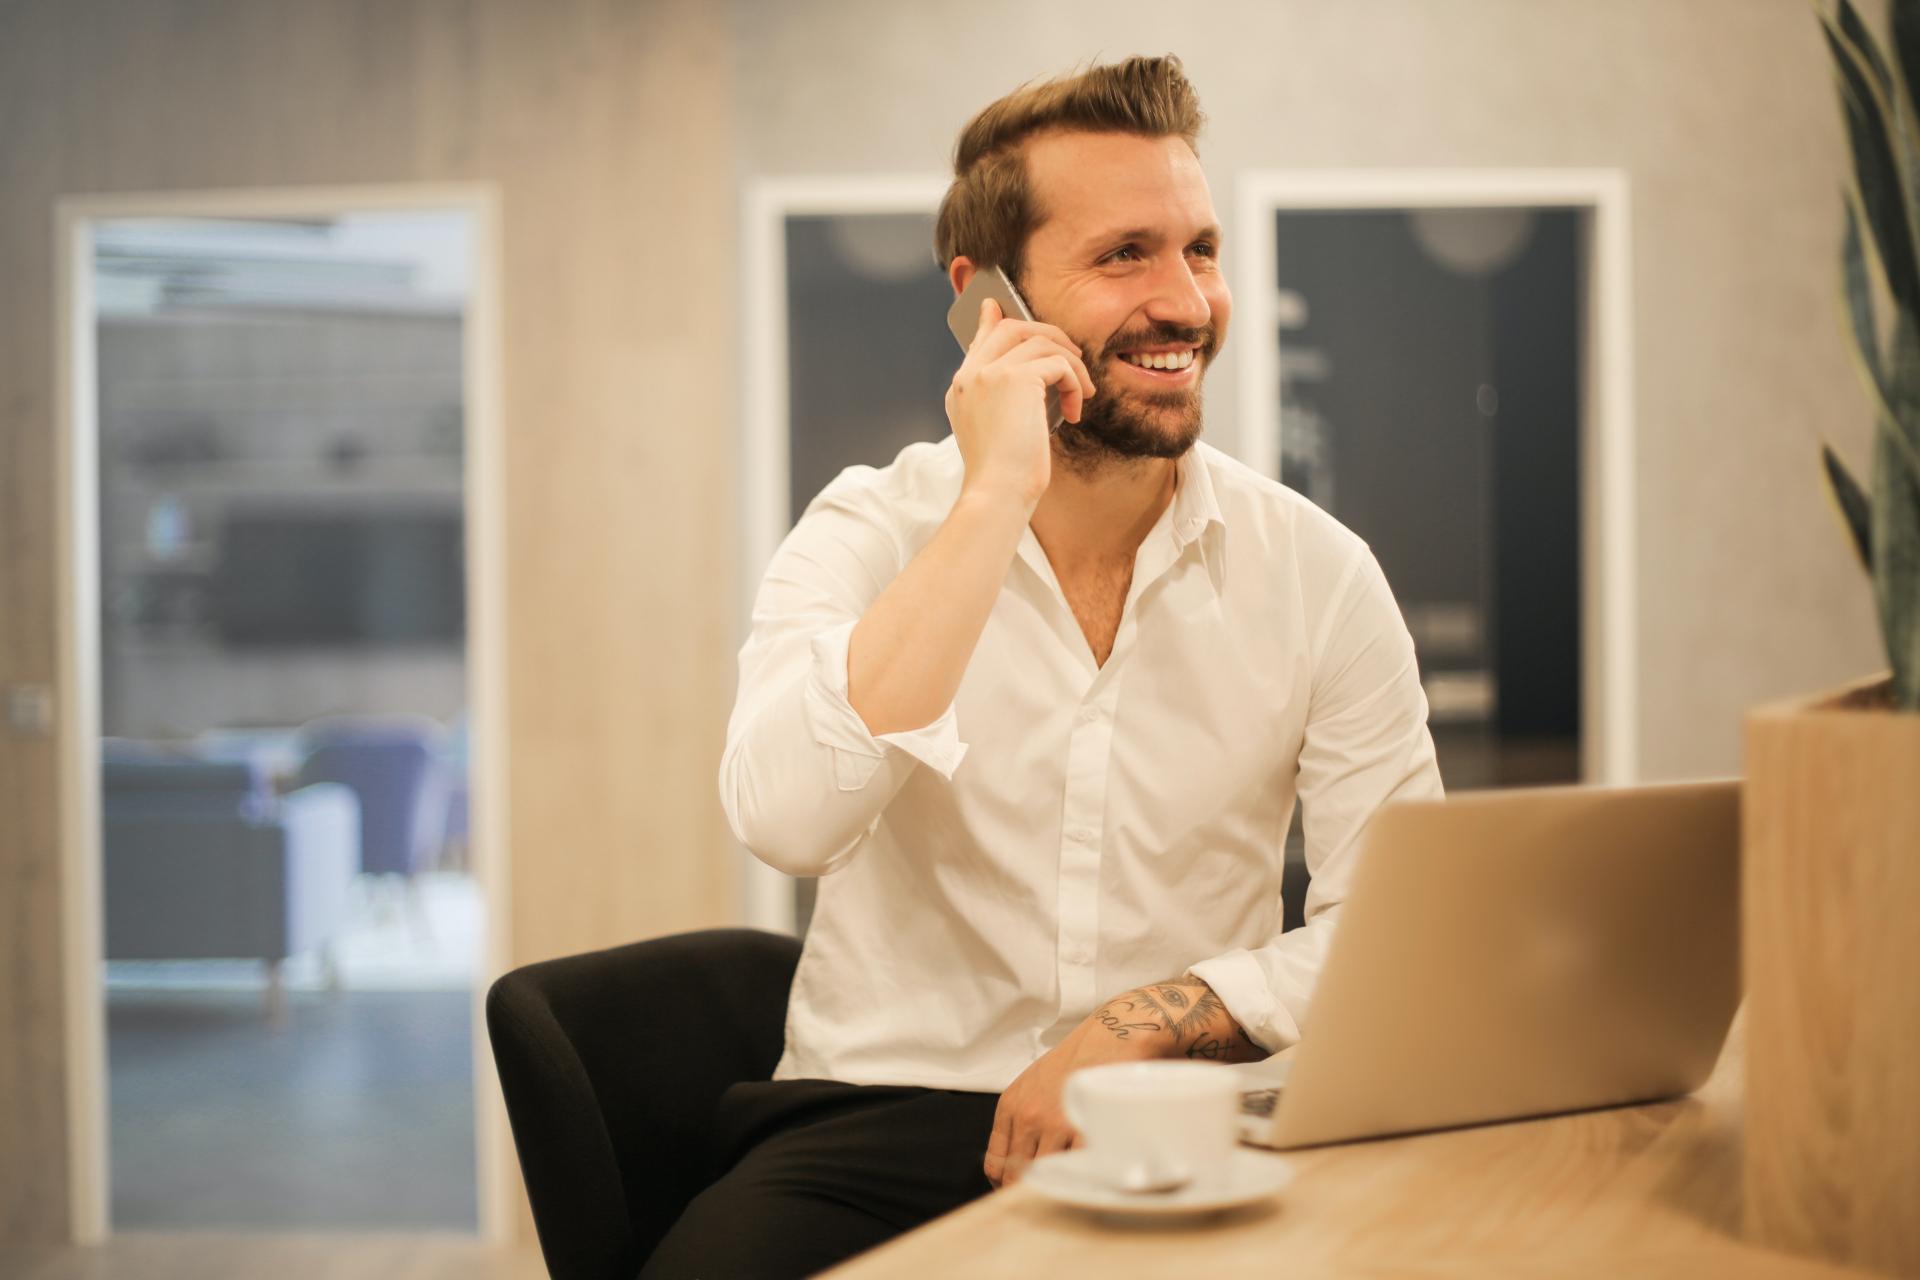 How to find the best free conference call service